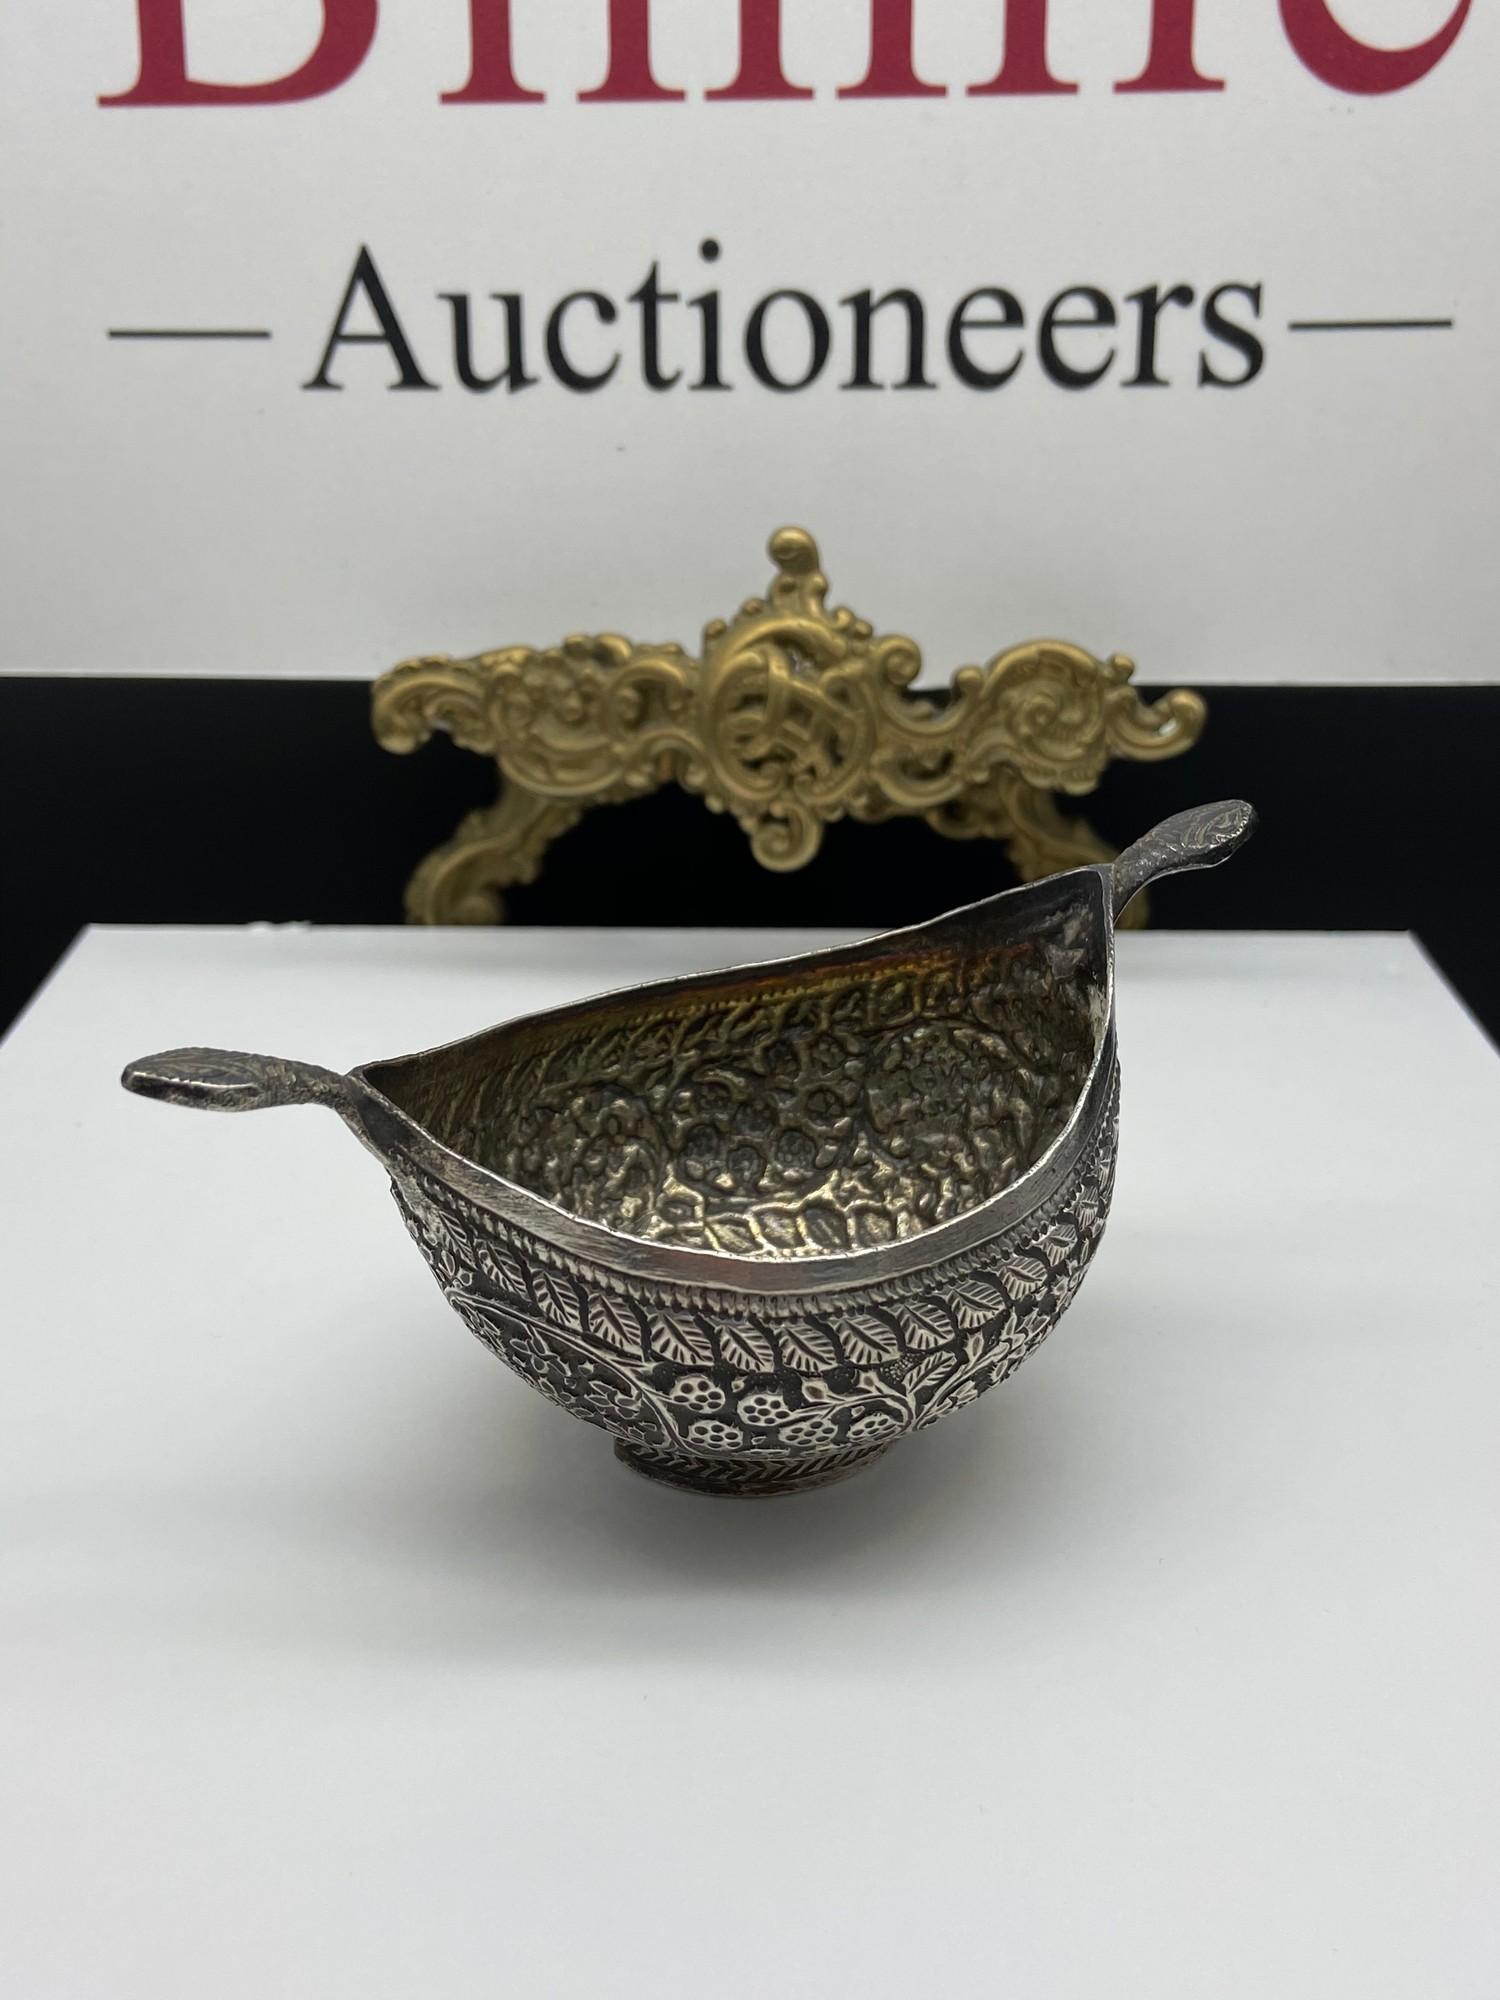 Antique Indian silver two handled drinking vessel/ cup. Handles are in the style of snake heads.[